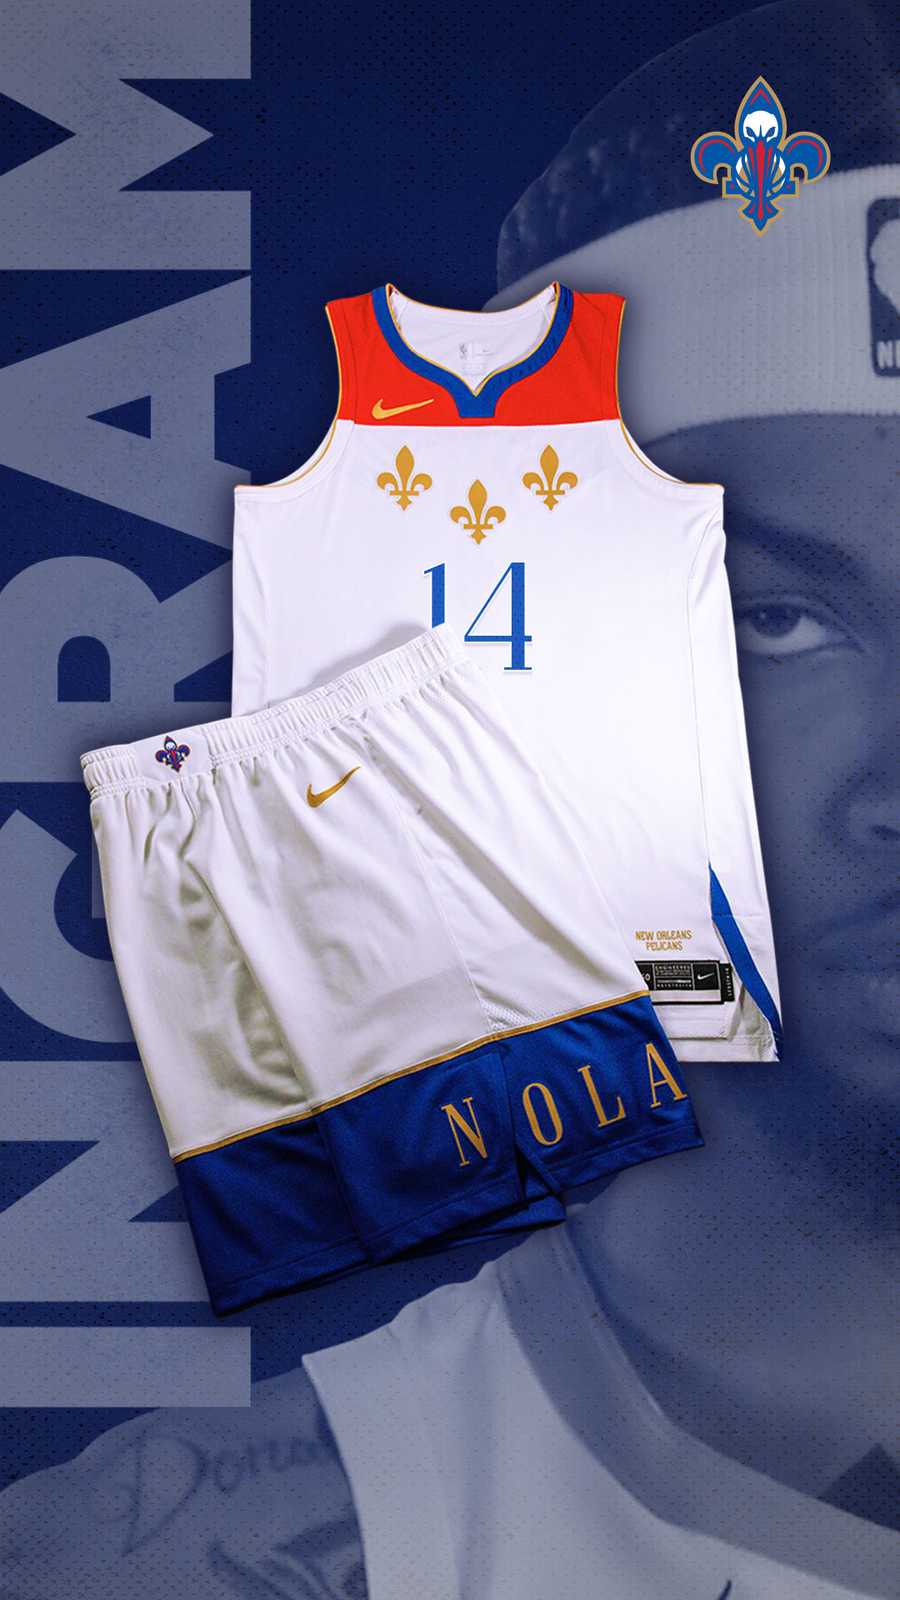 New Orleans Pelicans unveil Nike City Edition uniform inspired by